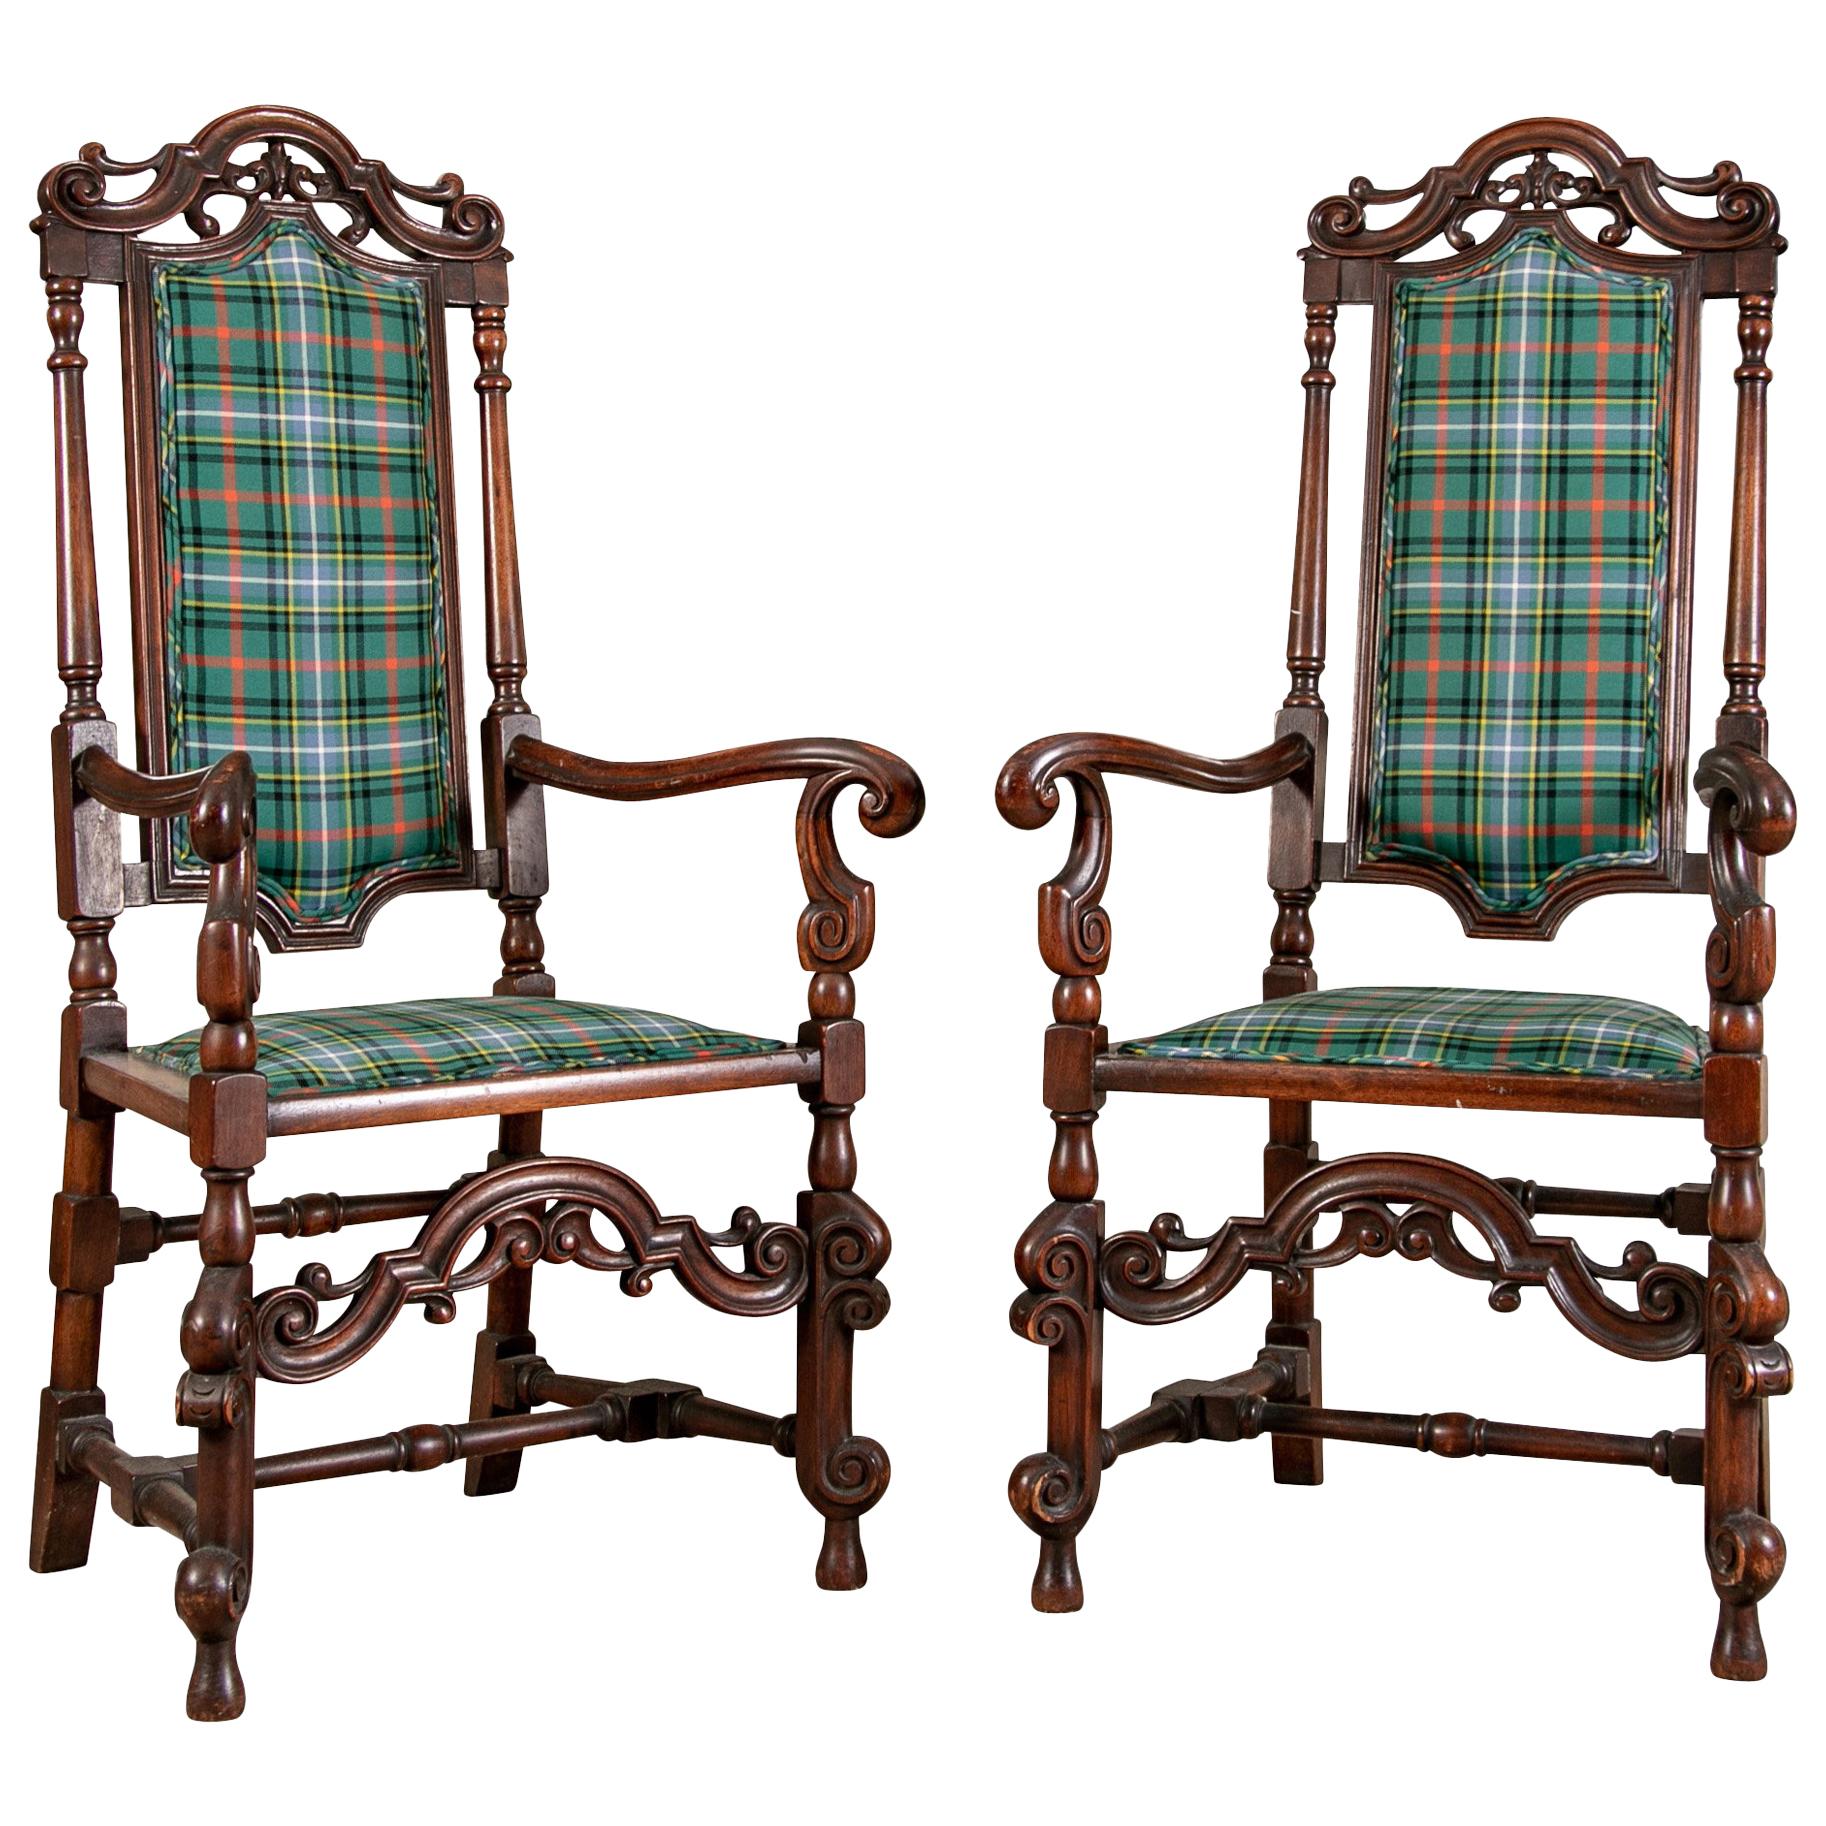 Pair of Antique English Carved Hall Chairs in a Tartan Plaid